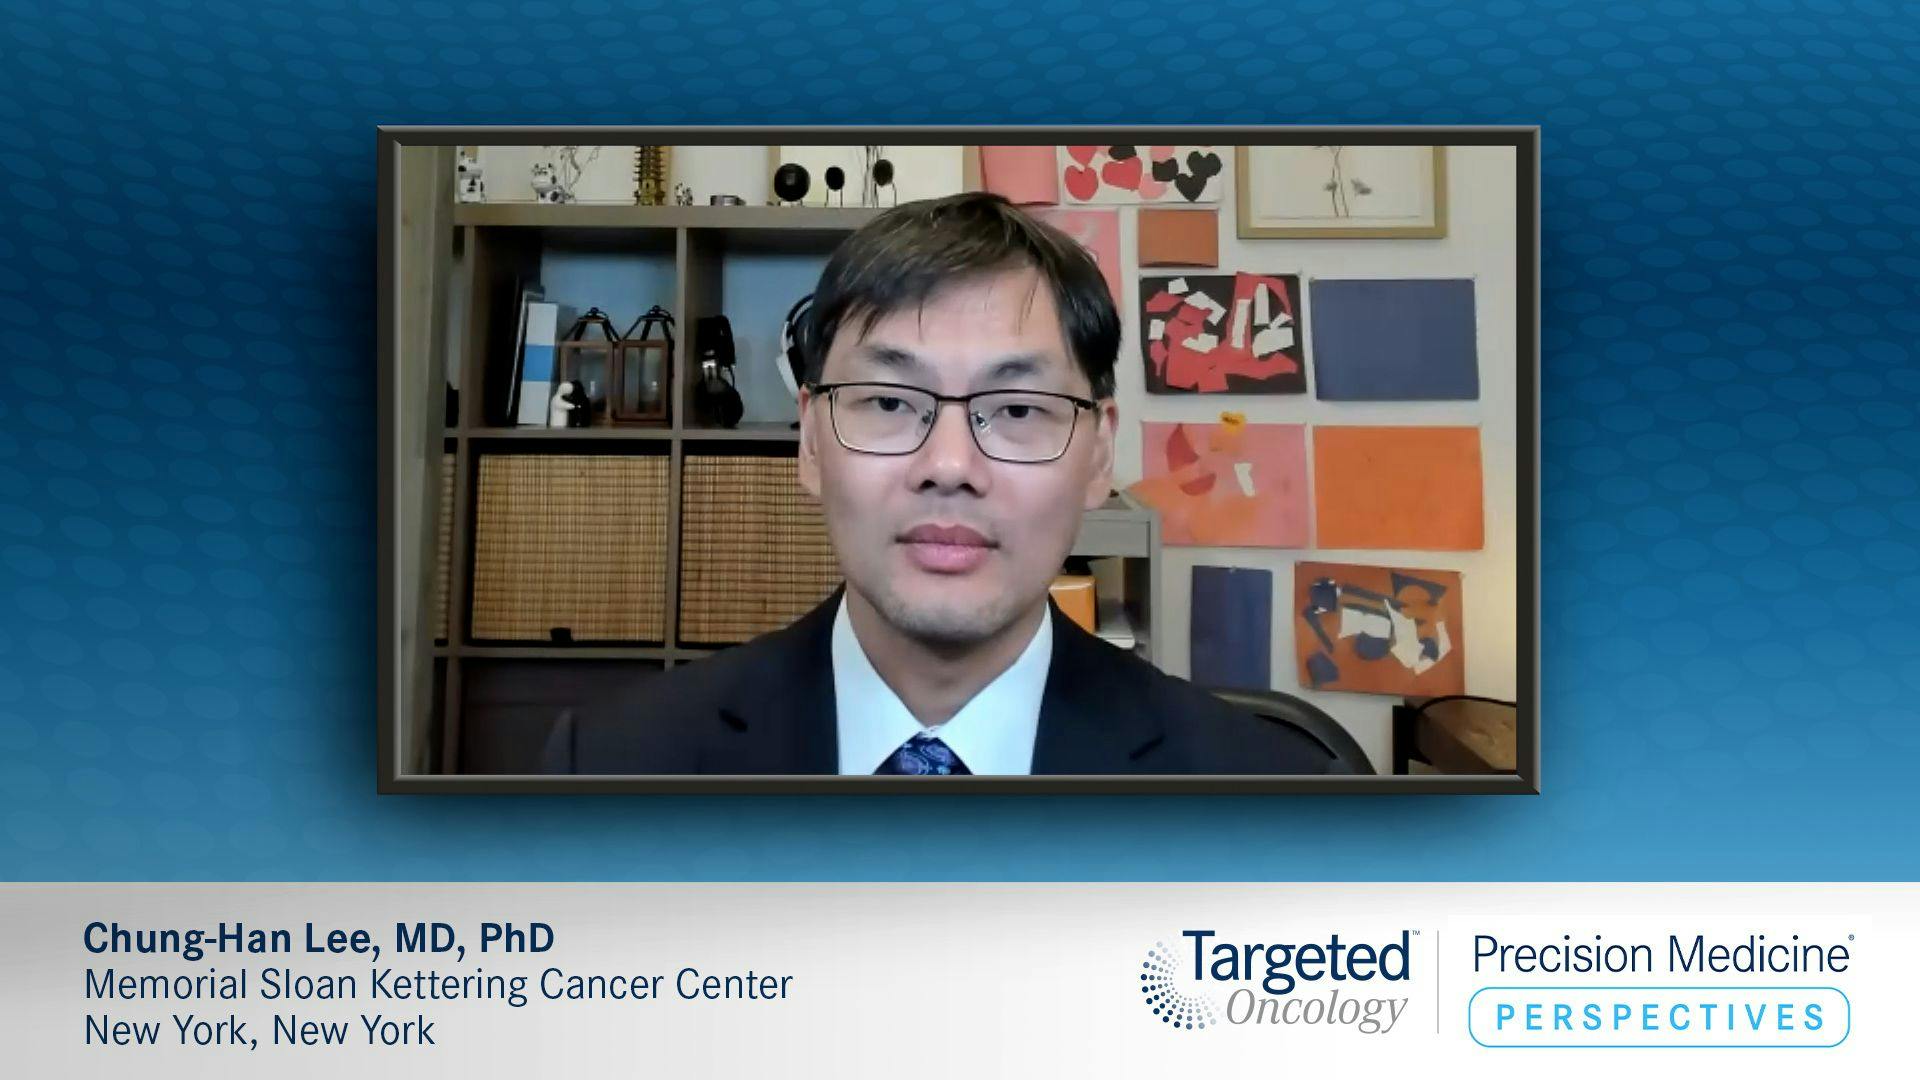 Chung-Han Lee, MD, PhD, an expert on renal cell carcinoma